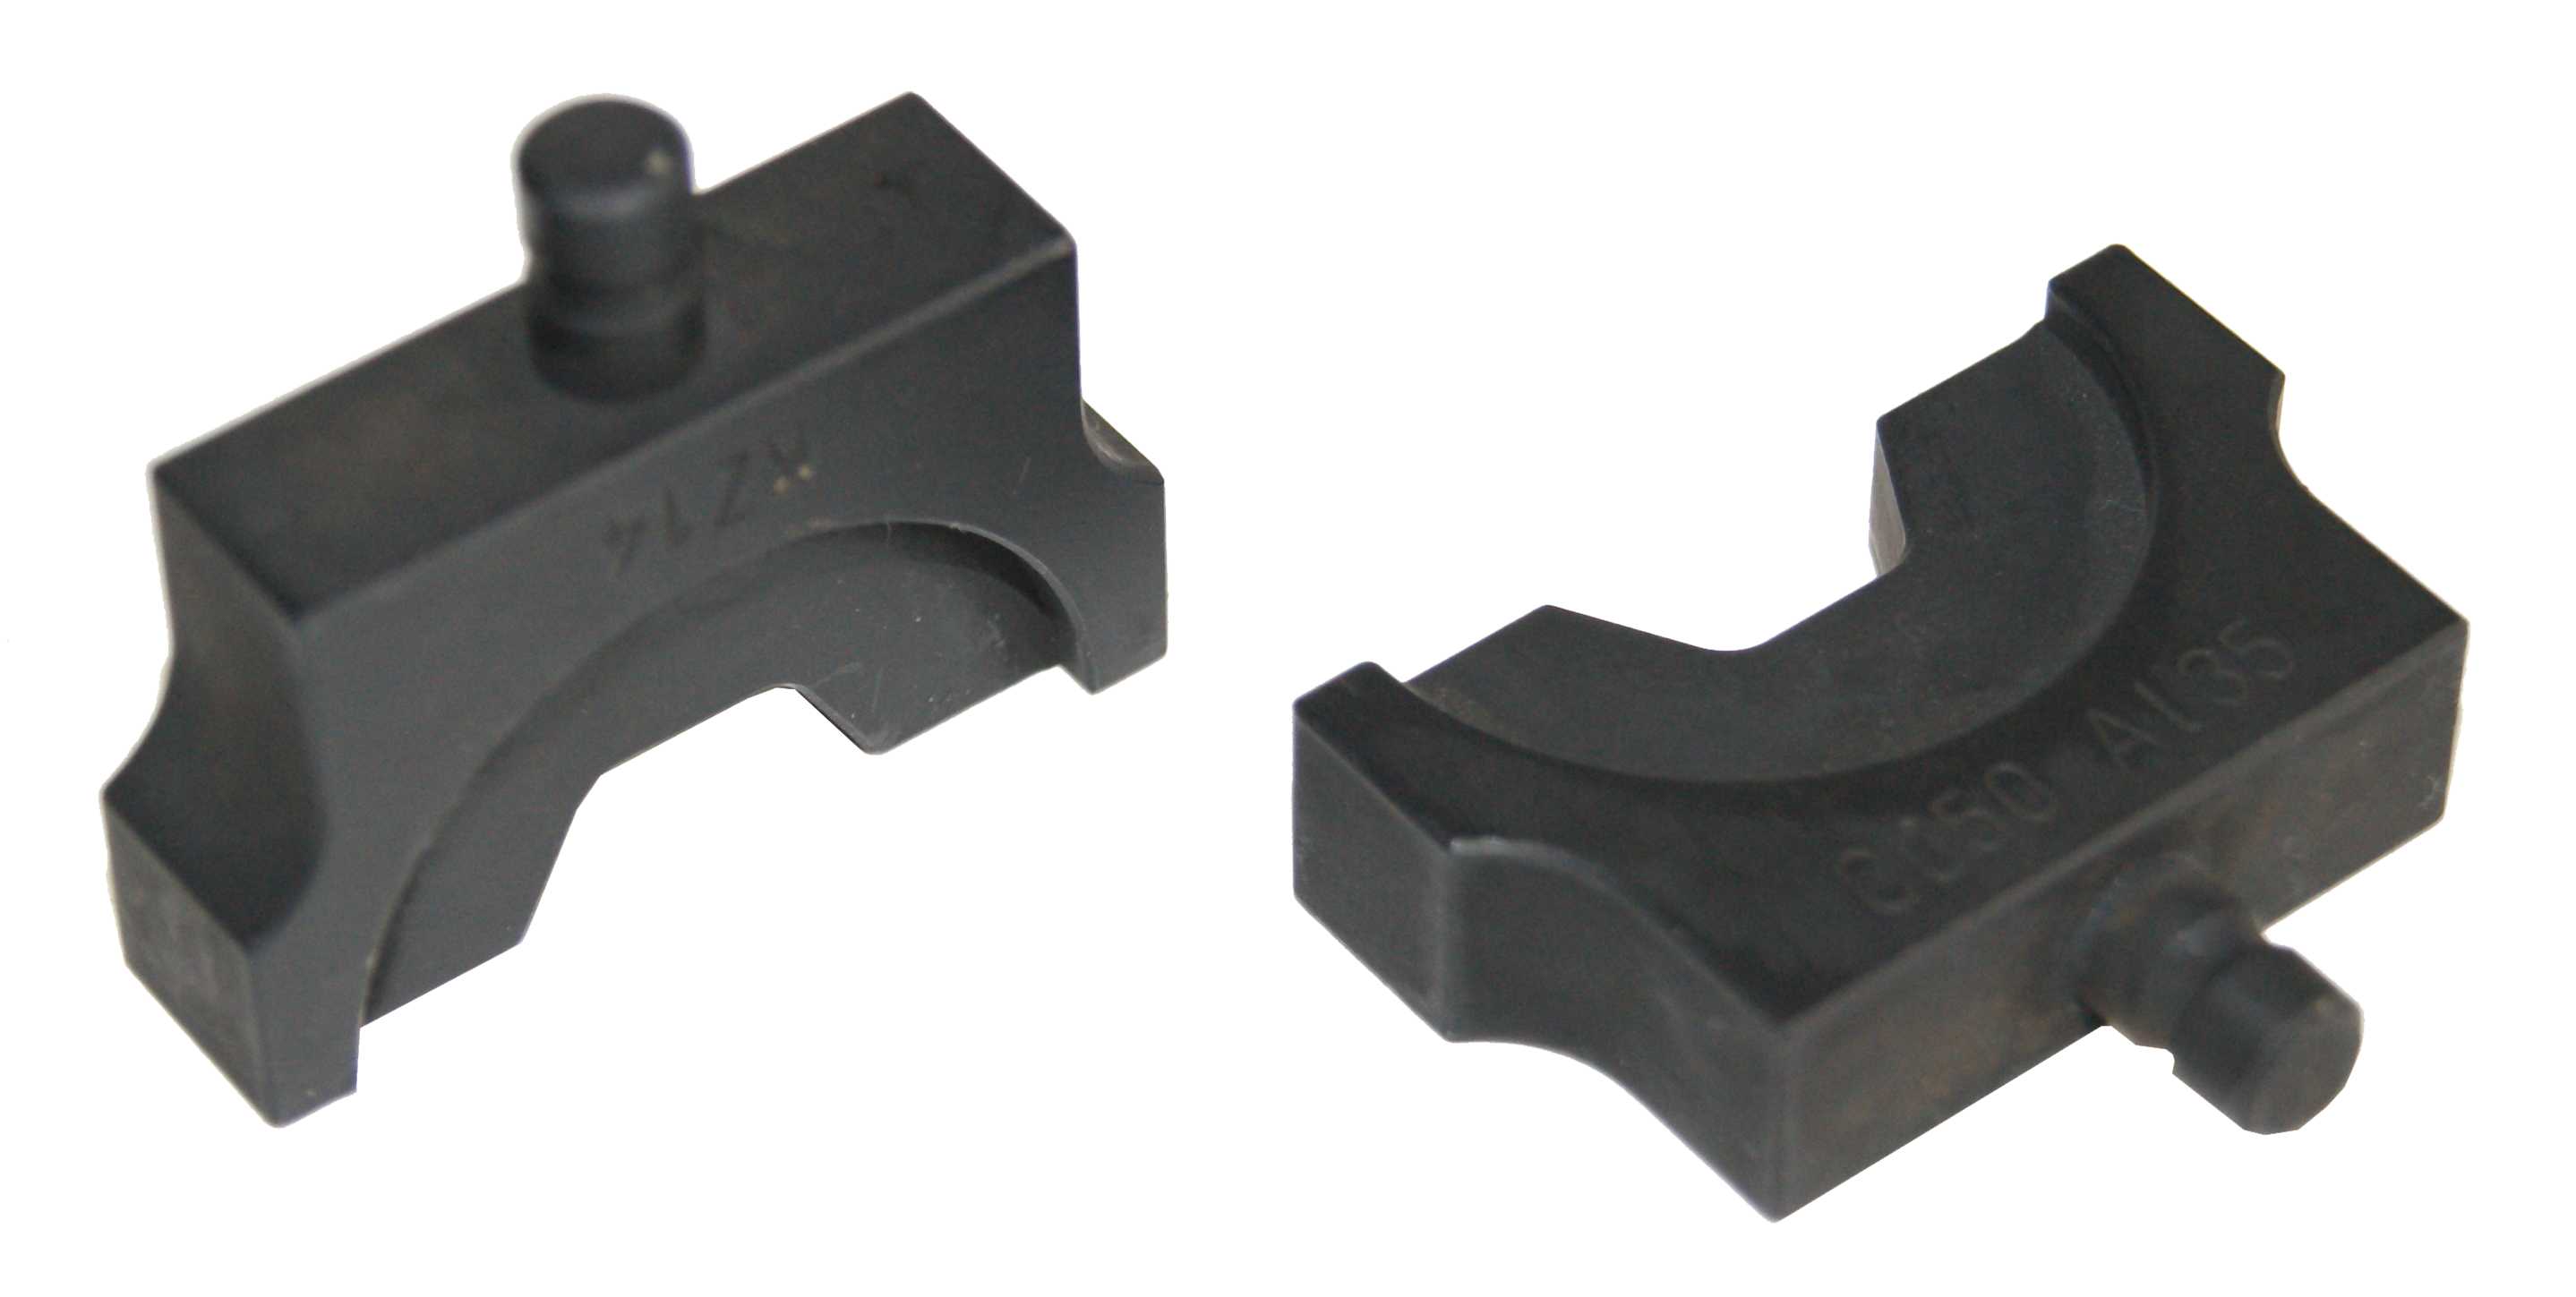 PTZ-35: Trapezoidal crimping insert for twin wire-end ferrules, "35" series, insulated and non-insulated version